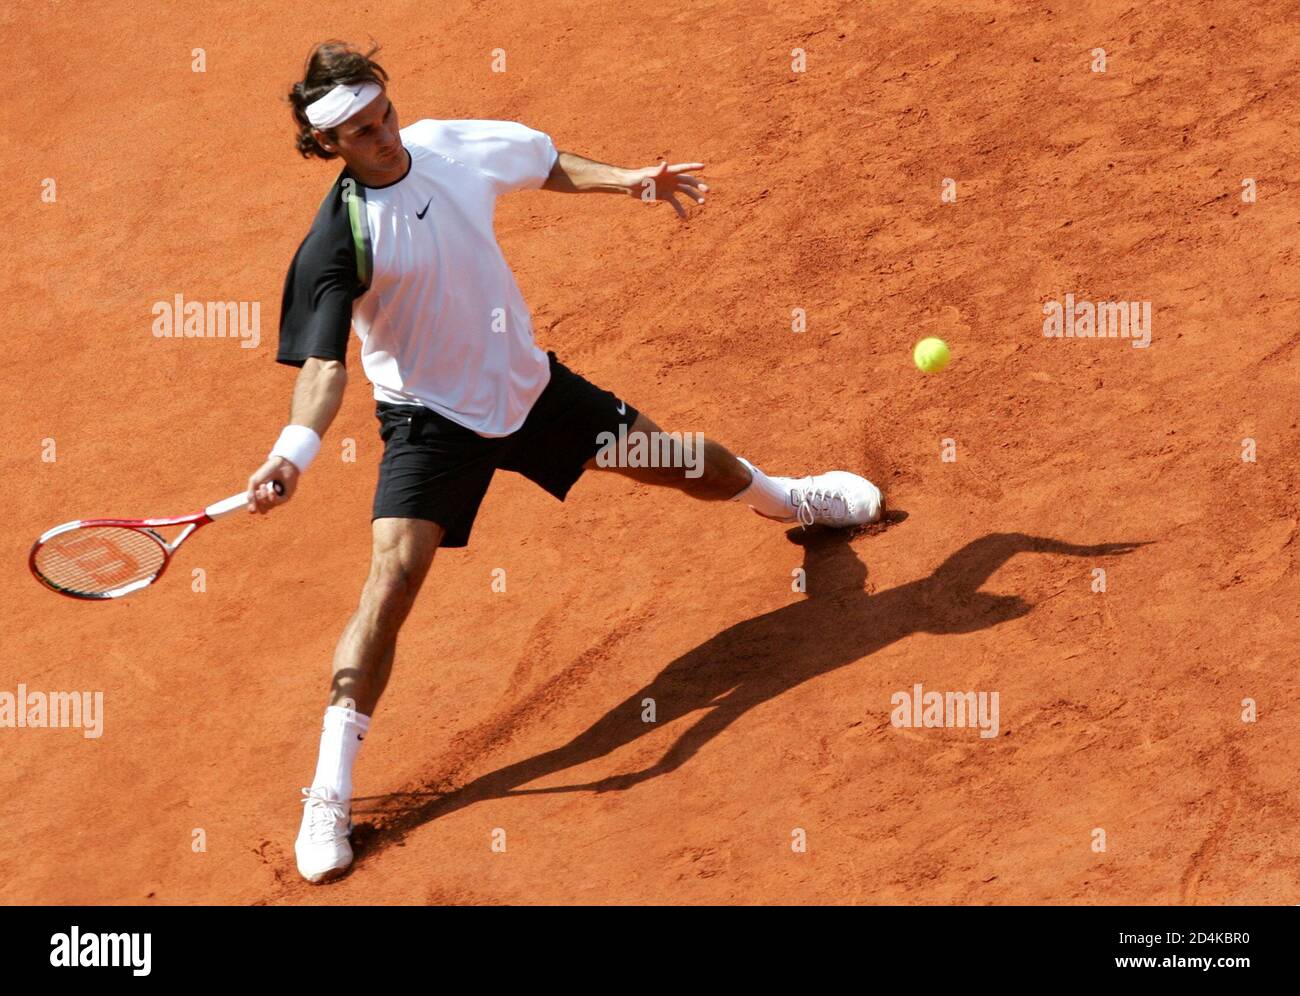 Federer from Switzerland returns ball to Davydenko from Russia during  semifinal match at Hamburg Masters Tennis tournament. Roger Federer from  Switzerland returns a ball to Nikolay Davydenko from Russia in a semifinal